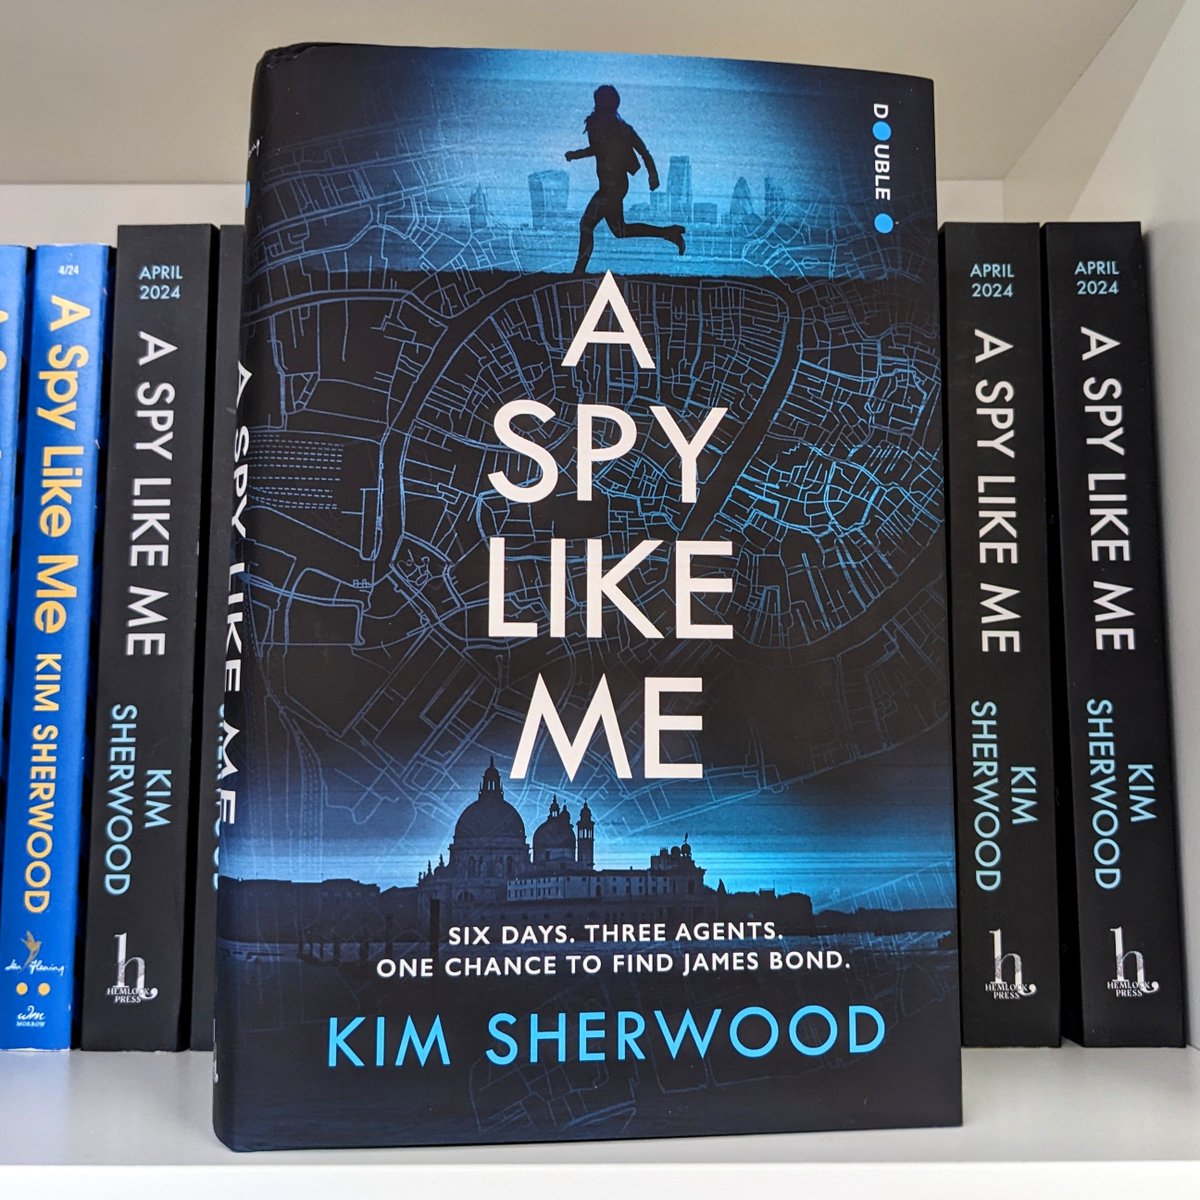 Available for pre-order now from our site are signed copies of the UK hardback edition of @kimtsherwood's new Double O novel, A Spy Like Me. Strictly limited to 100 copies, get yours now! bit.ly/ASLMsigned